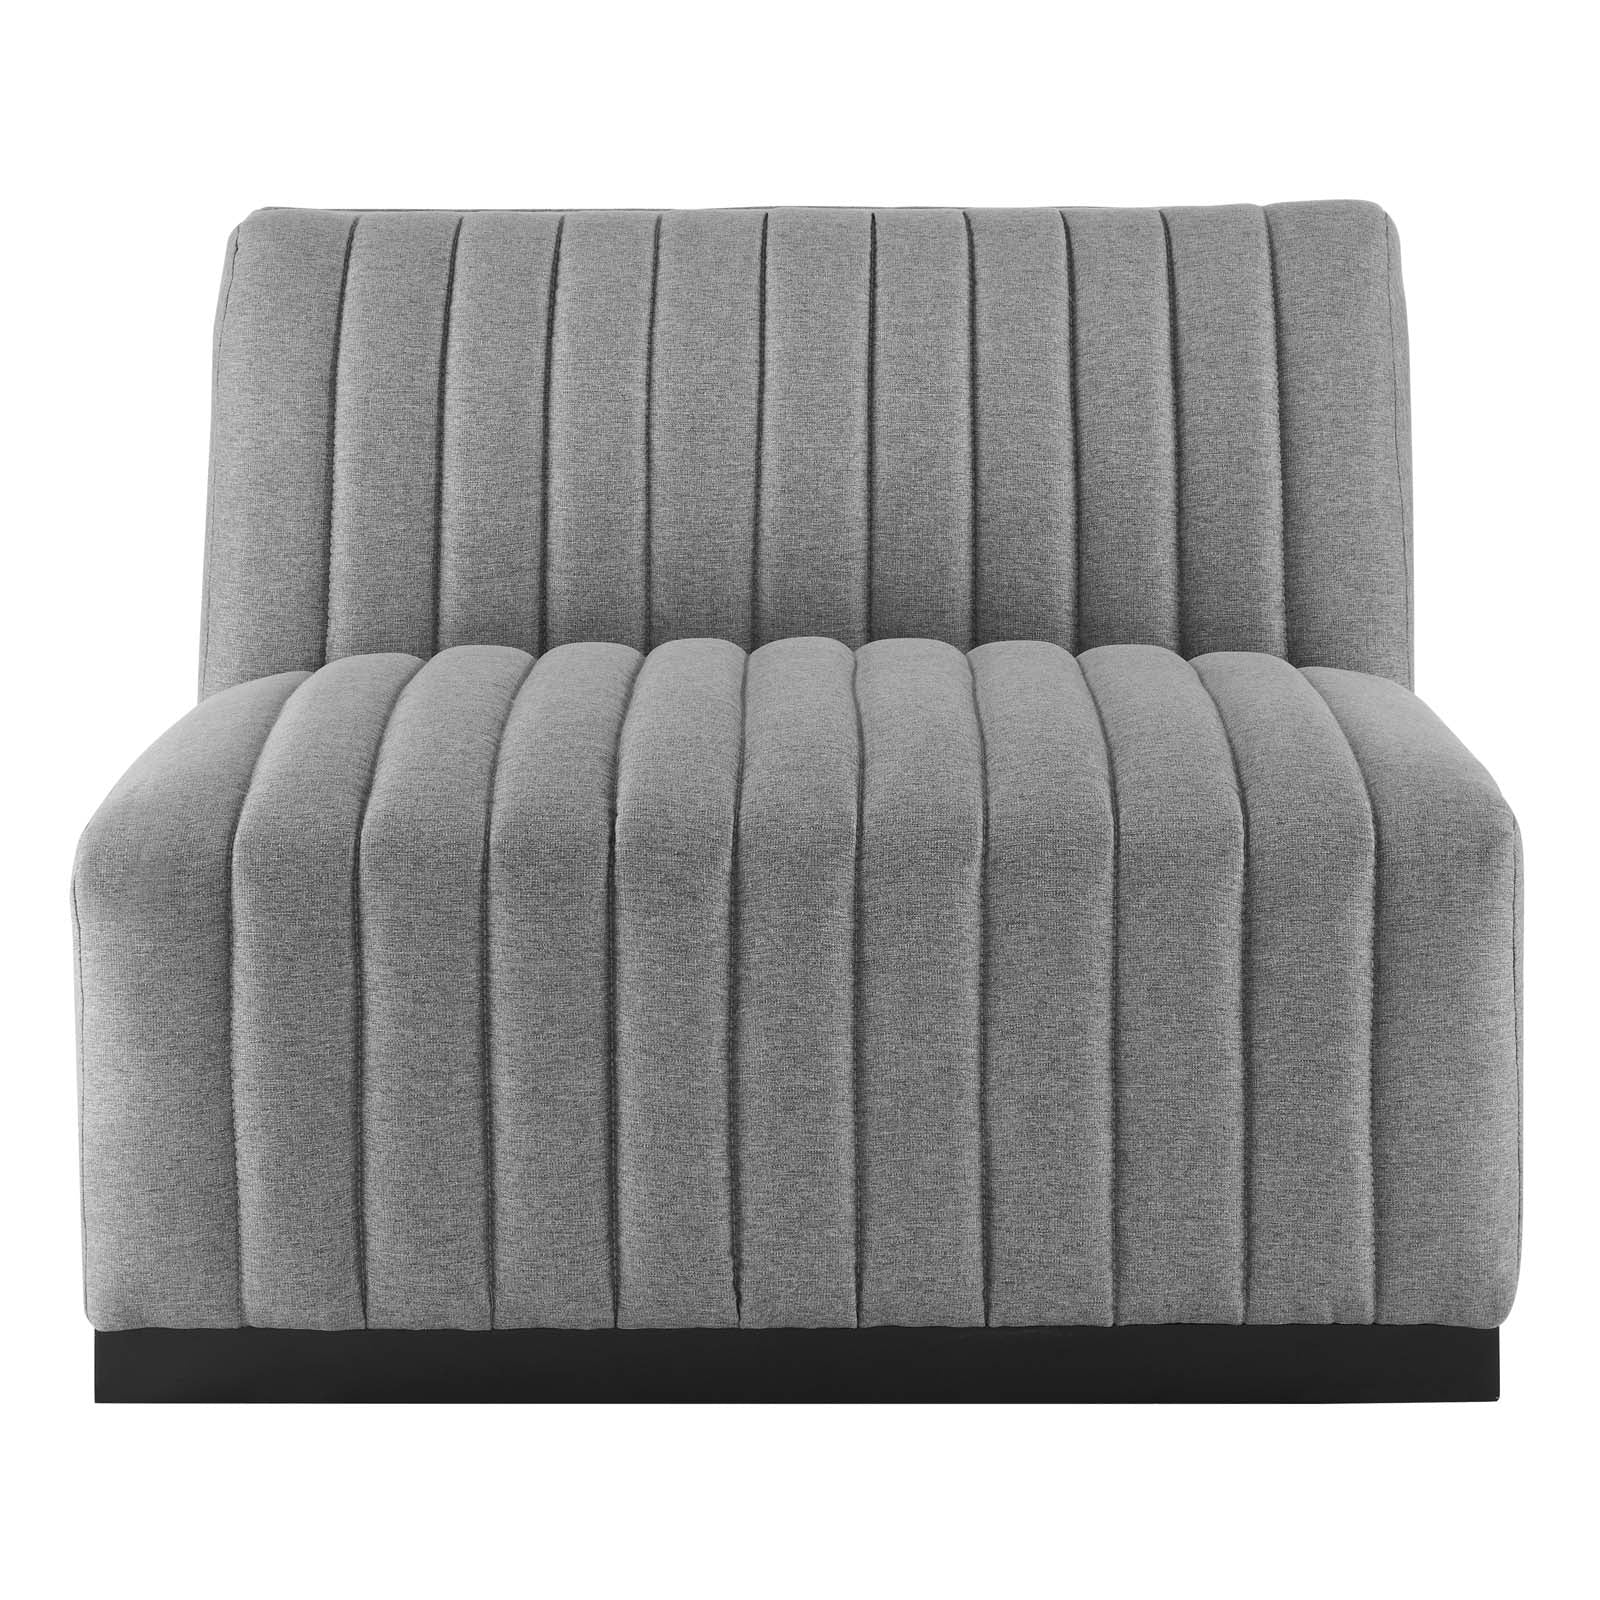 Conjure Channel Tufted Upholstered Fabric 4-Piece L-Shaped Sectional - East Shore Modern Home Furnishings